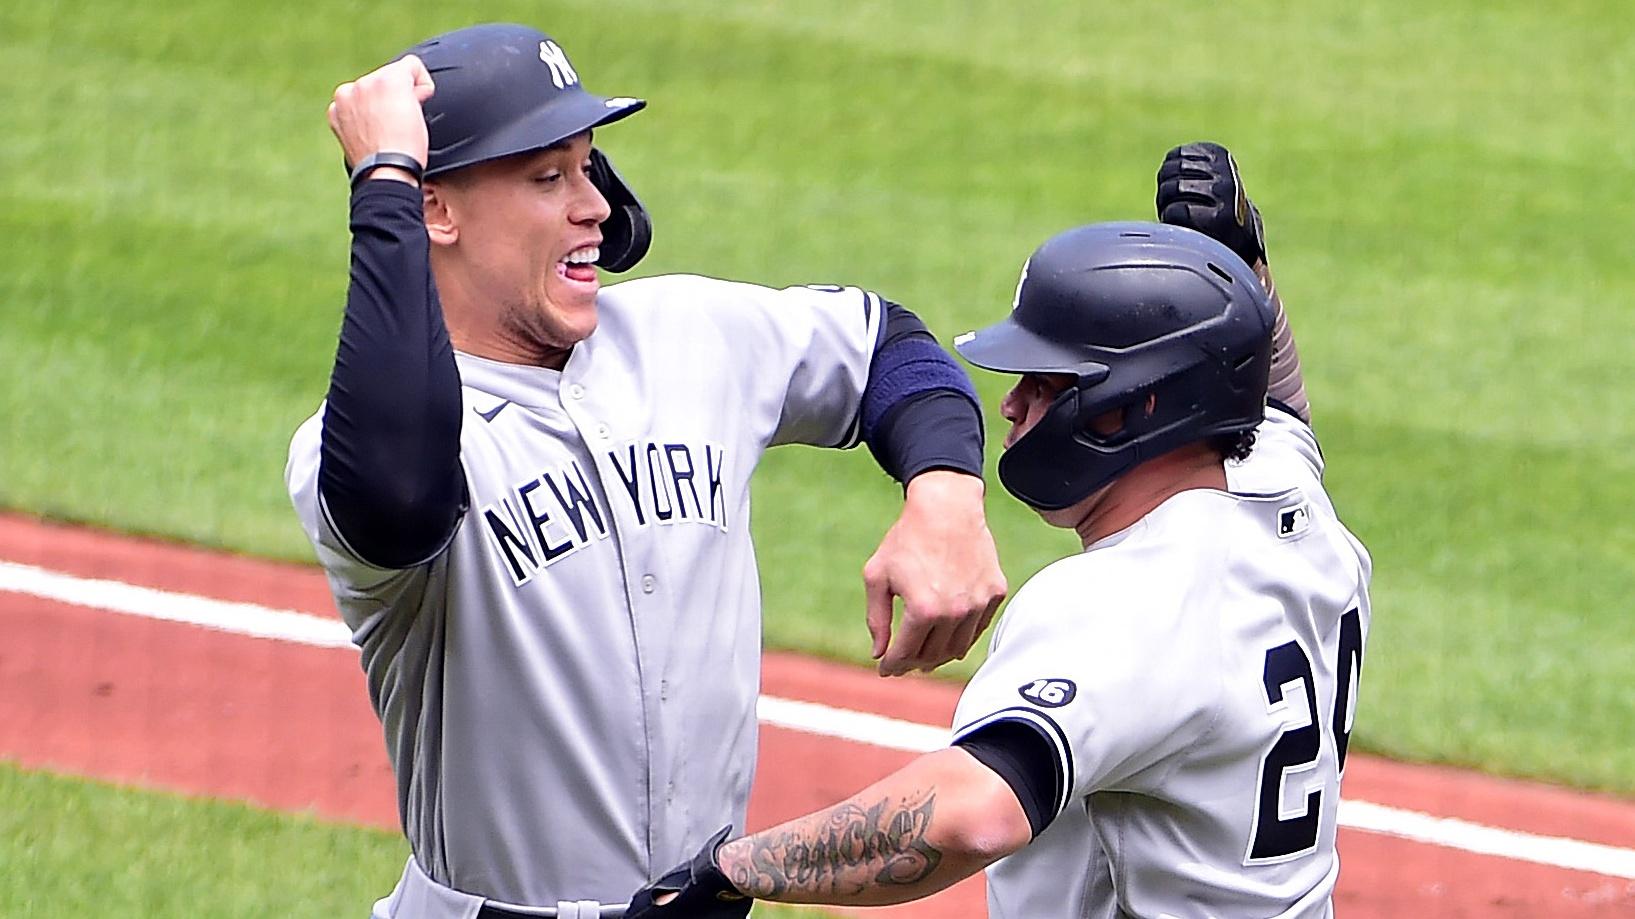 May 16, 2021; Baltimore, Maryland, USA; New York Yankees catcher Gary Sanchez (24) is congratulated by outfielder Aaron Judge (99) after hitting a home run in the first inning against the Baltimore Orioles at Oriole Park at Camden Yards. Mandatory Credit: Evan Habeeb-USA TODAY Sports / © Evan Habeeb-USA TODAY Sports